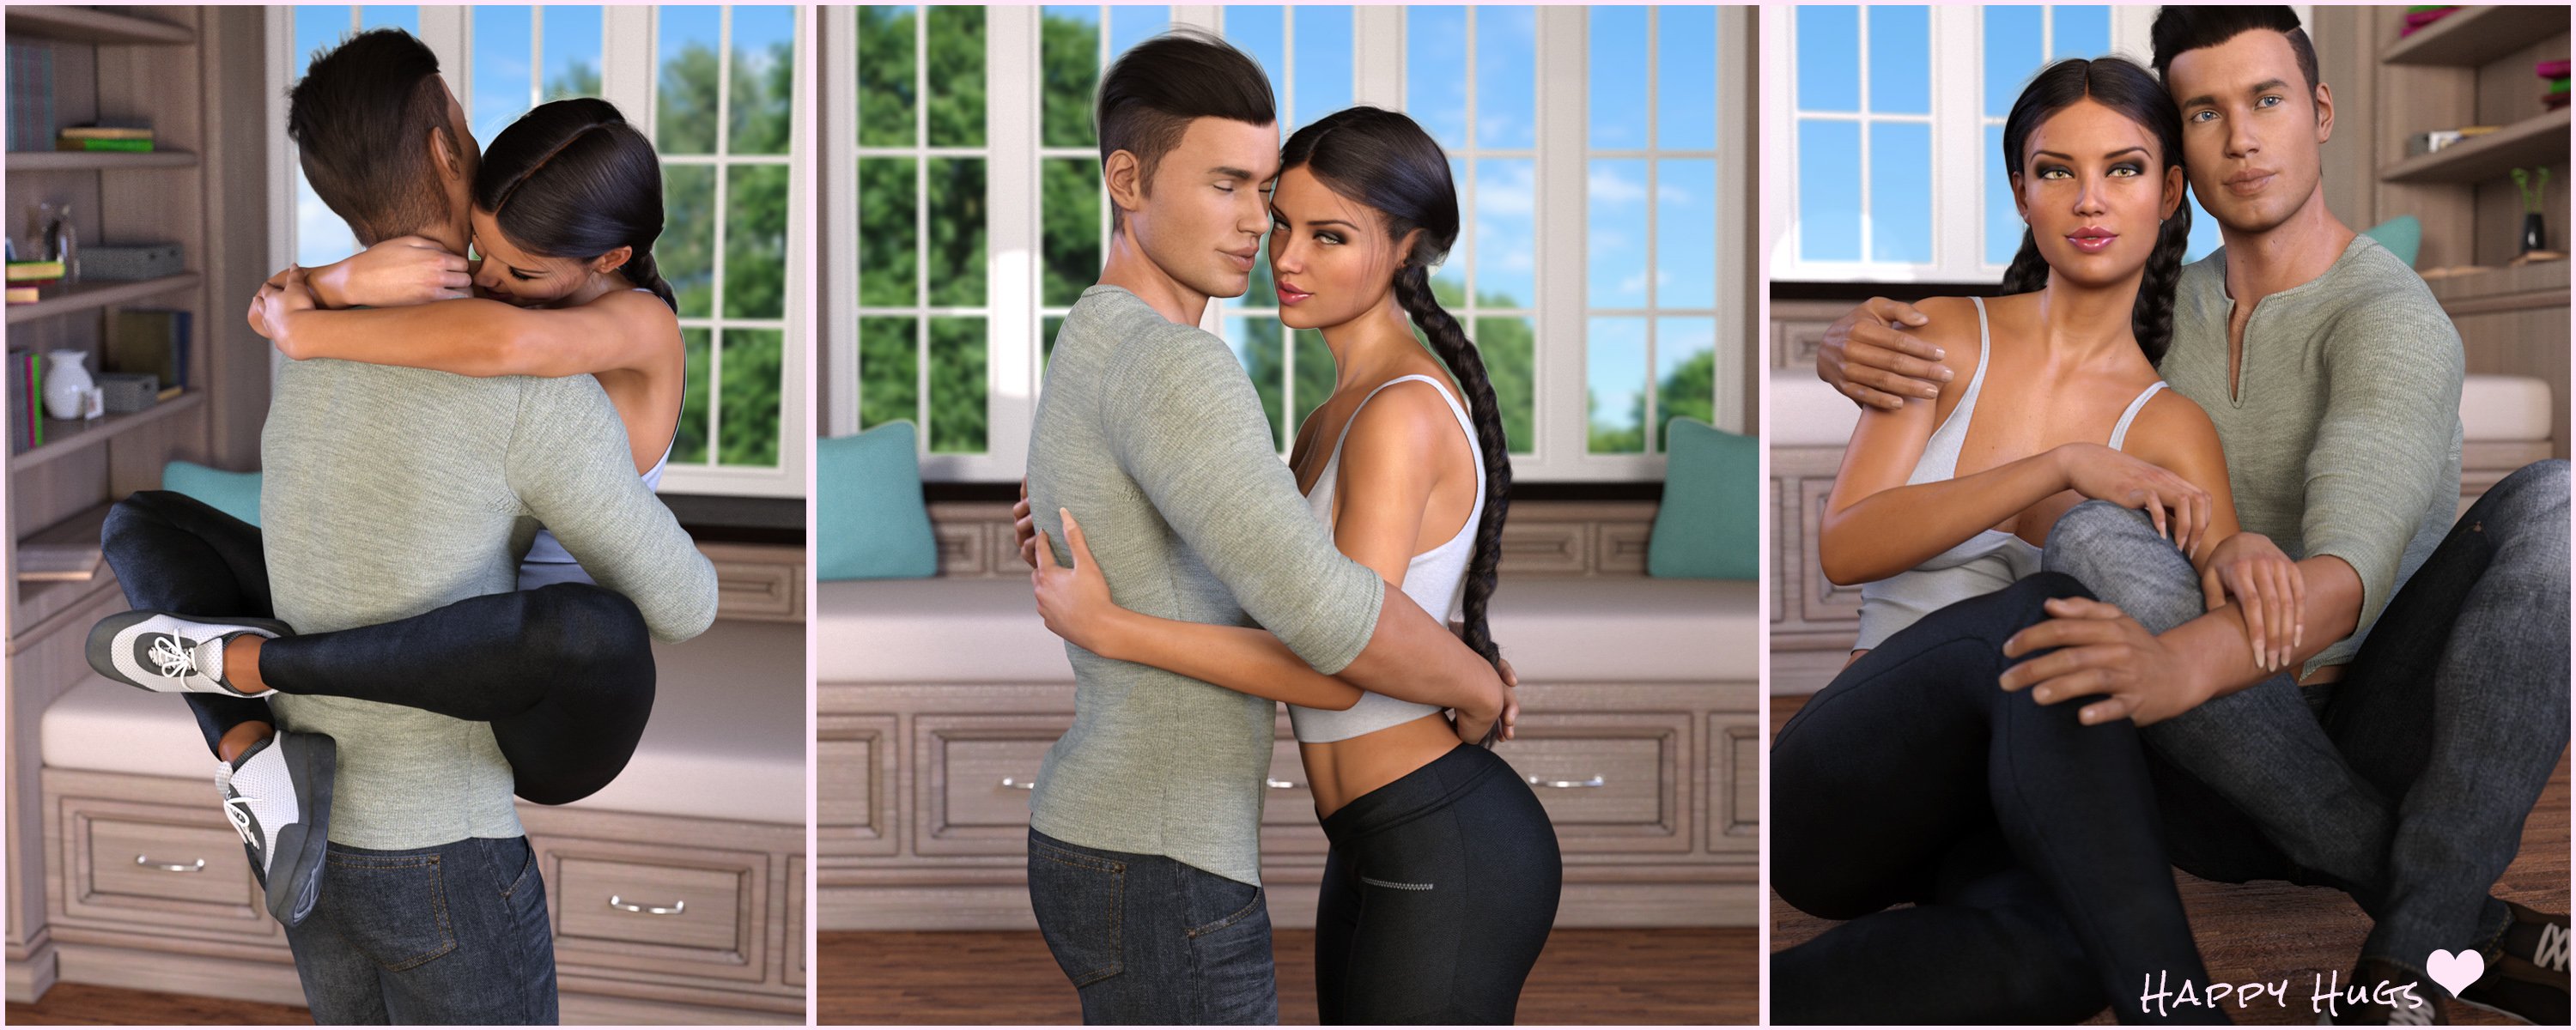 Z The Art Of Hugging - Couple Poses for Genesis 3 and 8 by: Zeddicuss, 3D Models by Daz 3D